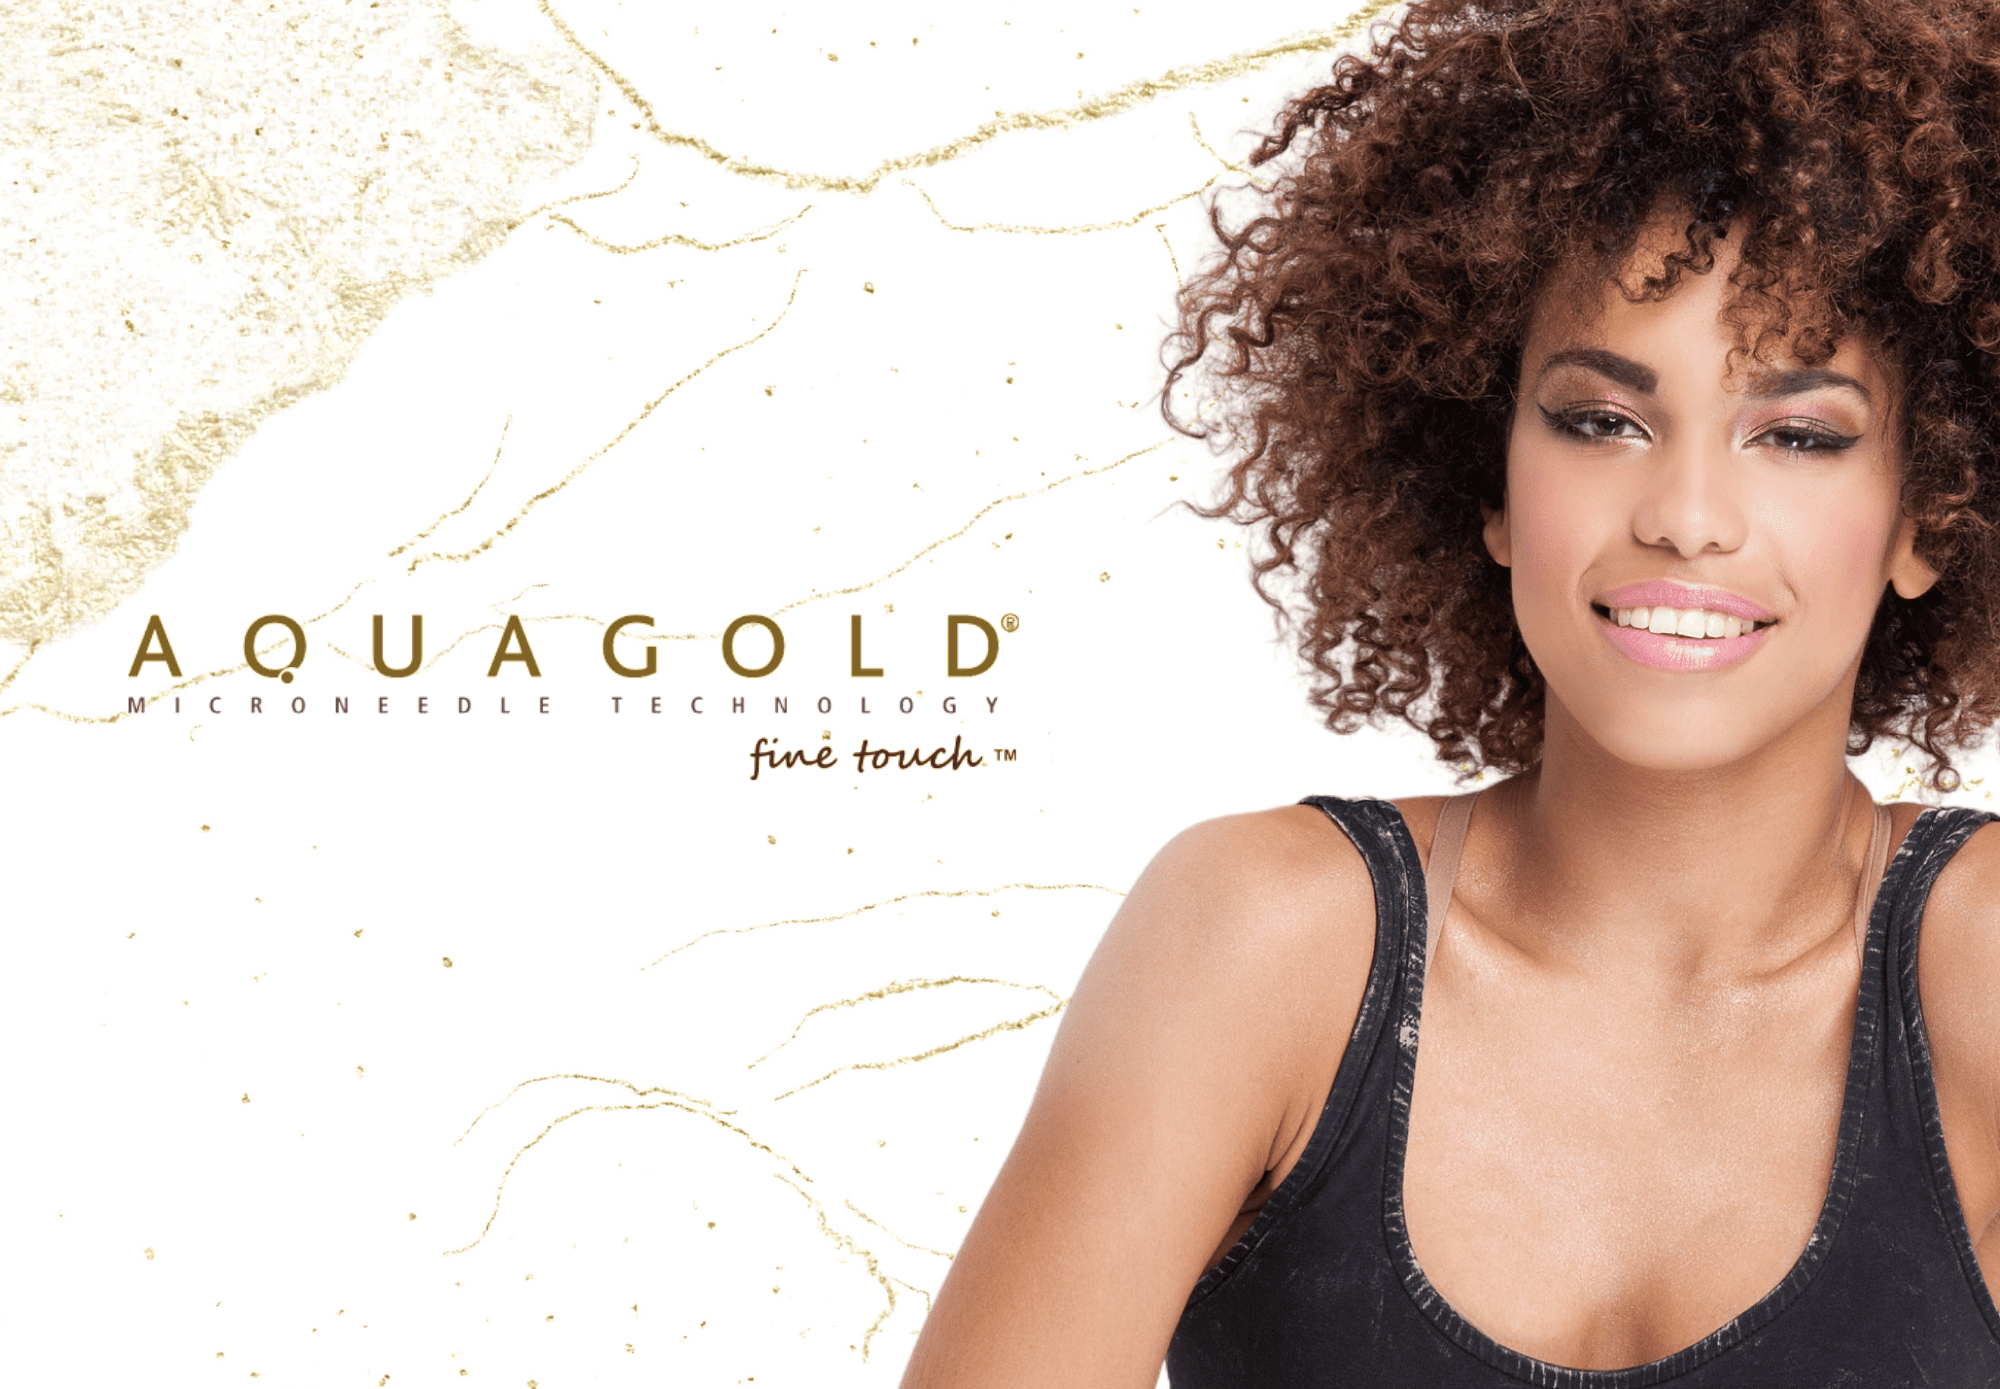 Aquagold fine touch logo with model woman.